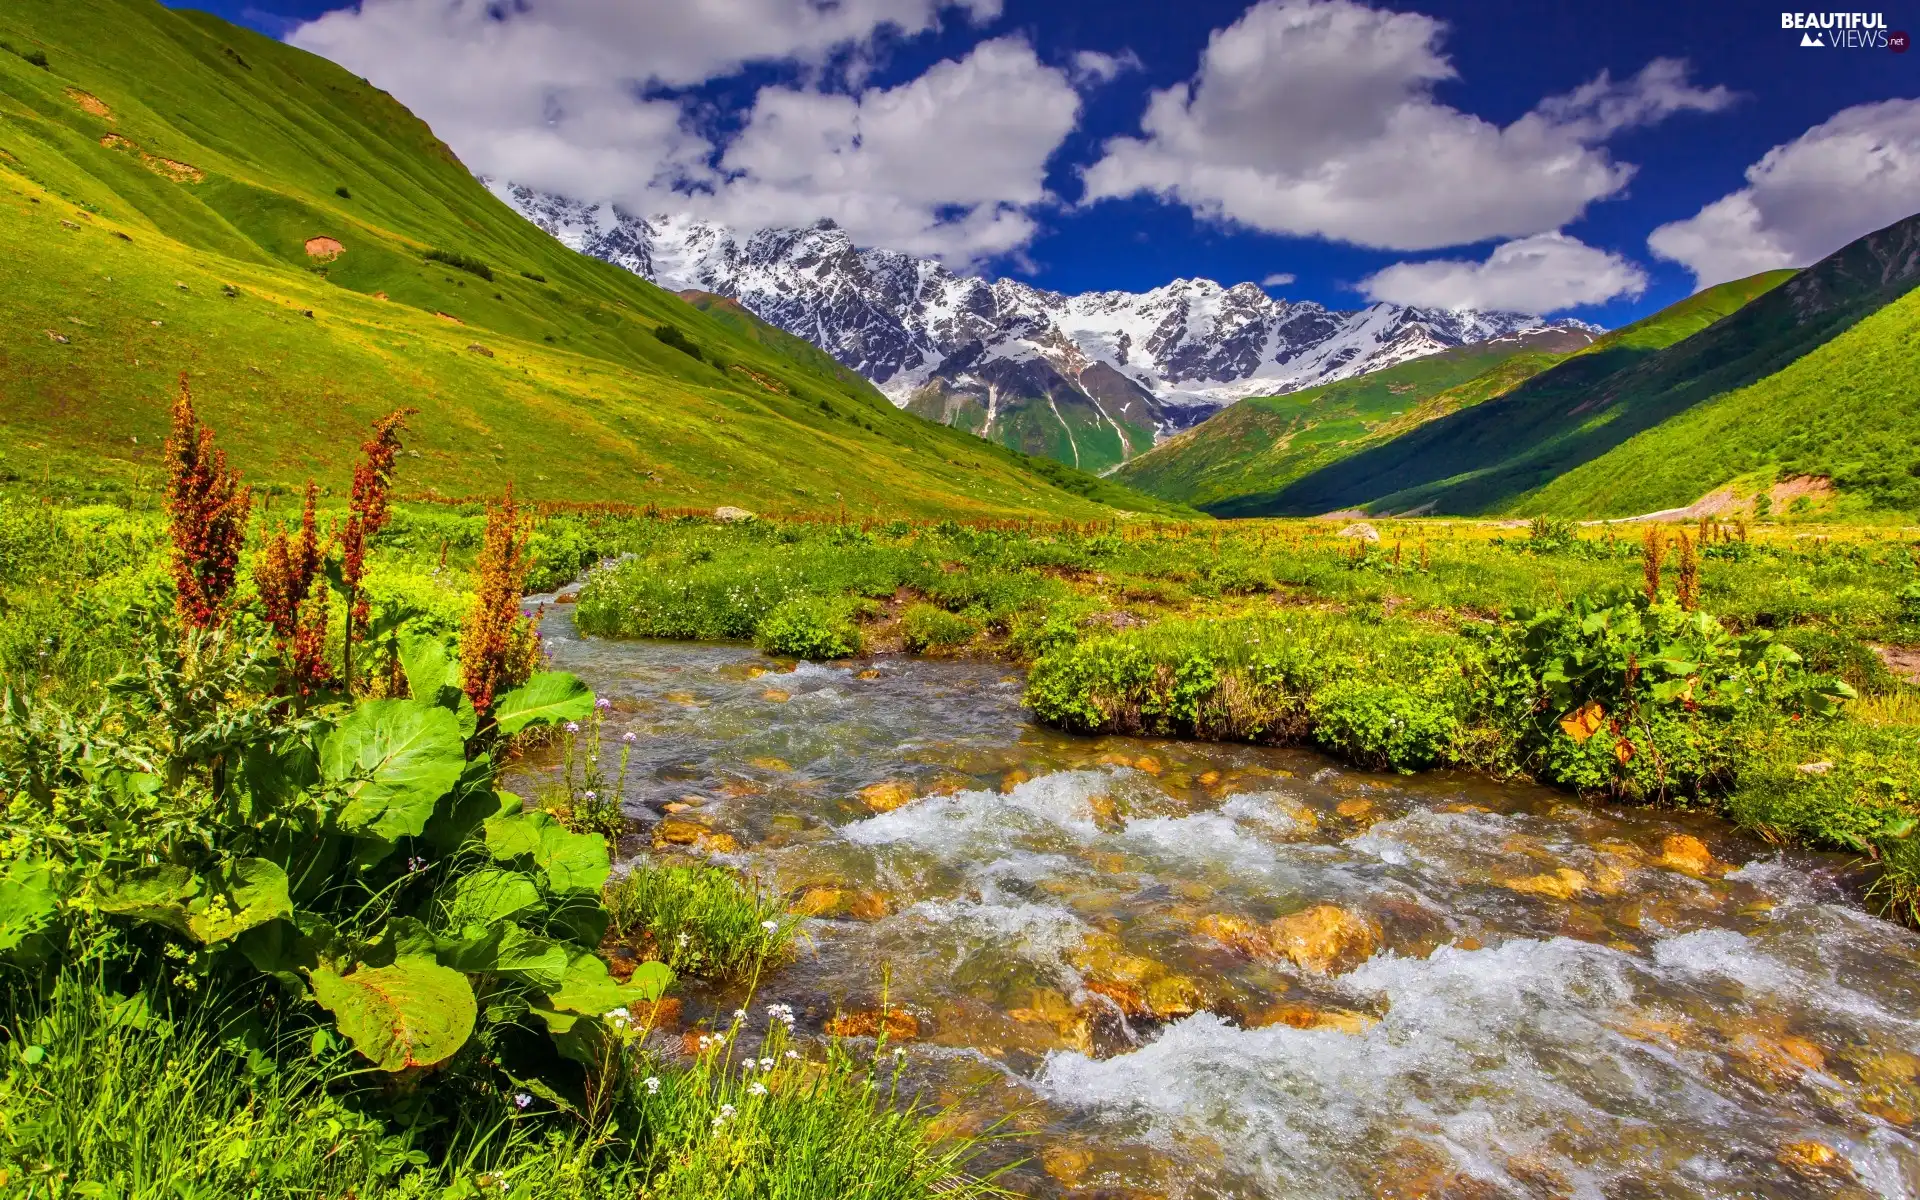 stream, Plants, Mountains, medows, clouds